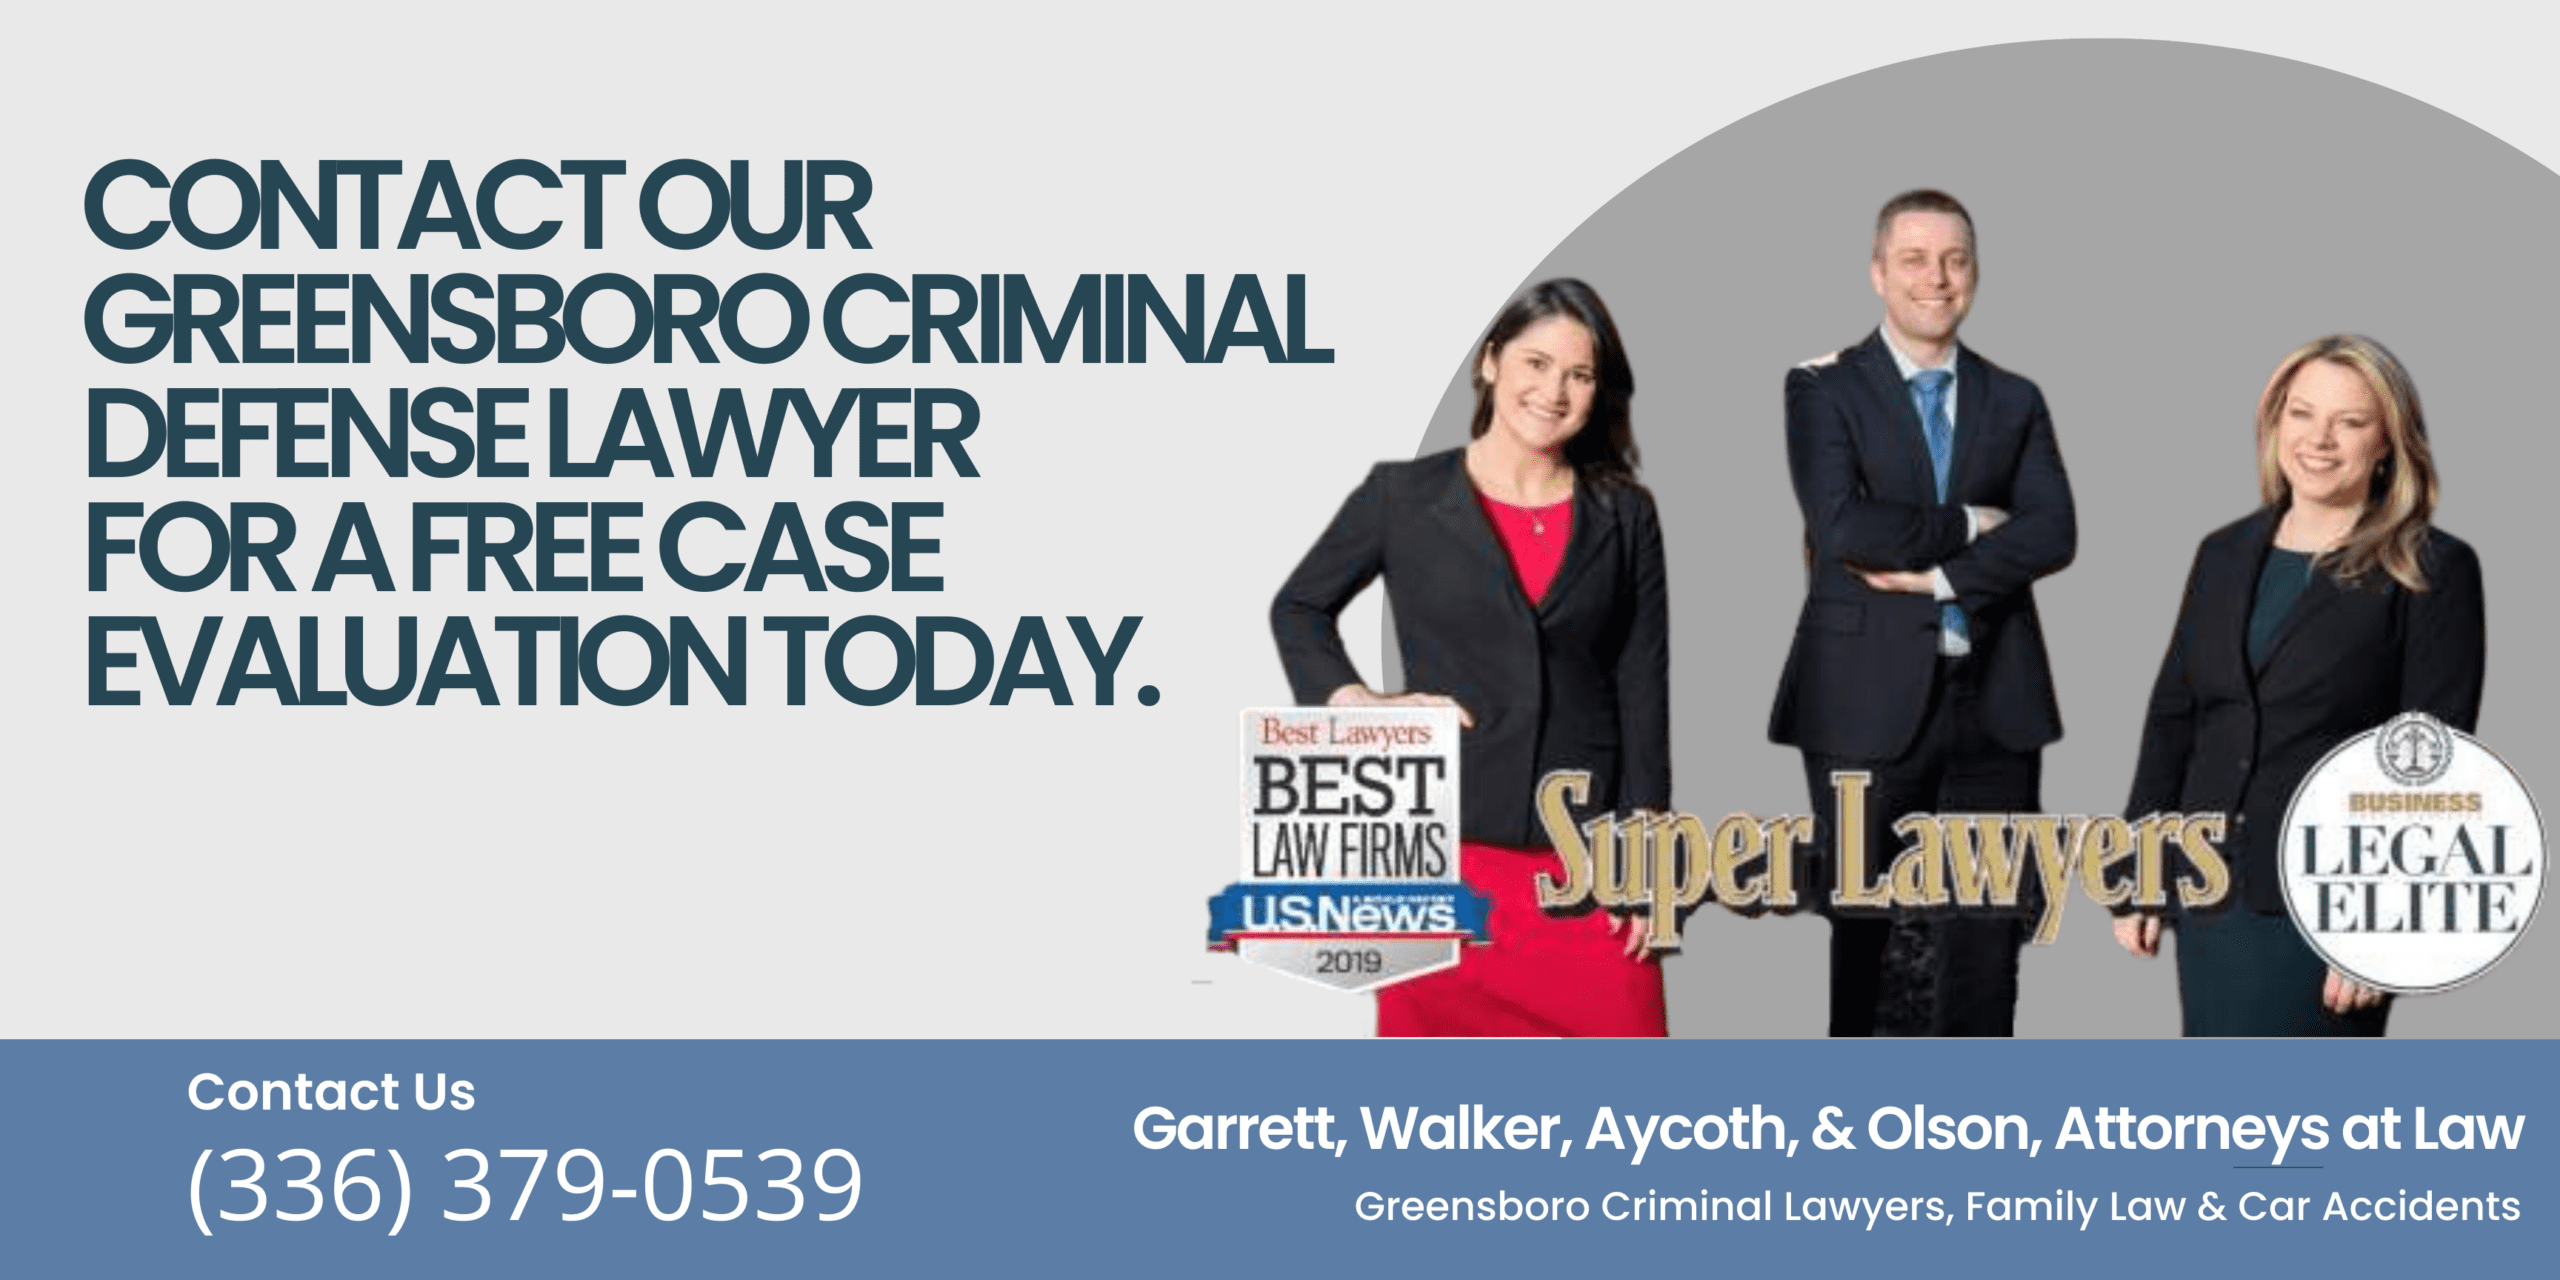 Contact our Greensboro Criminal Defense Lawyer